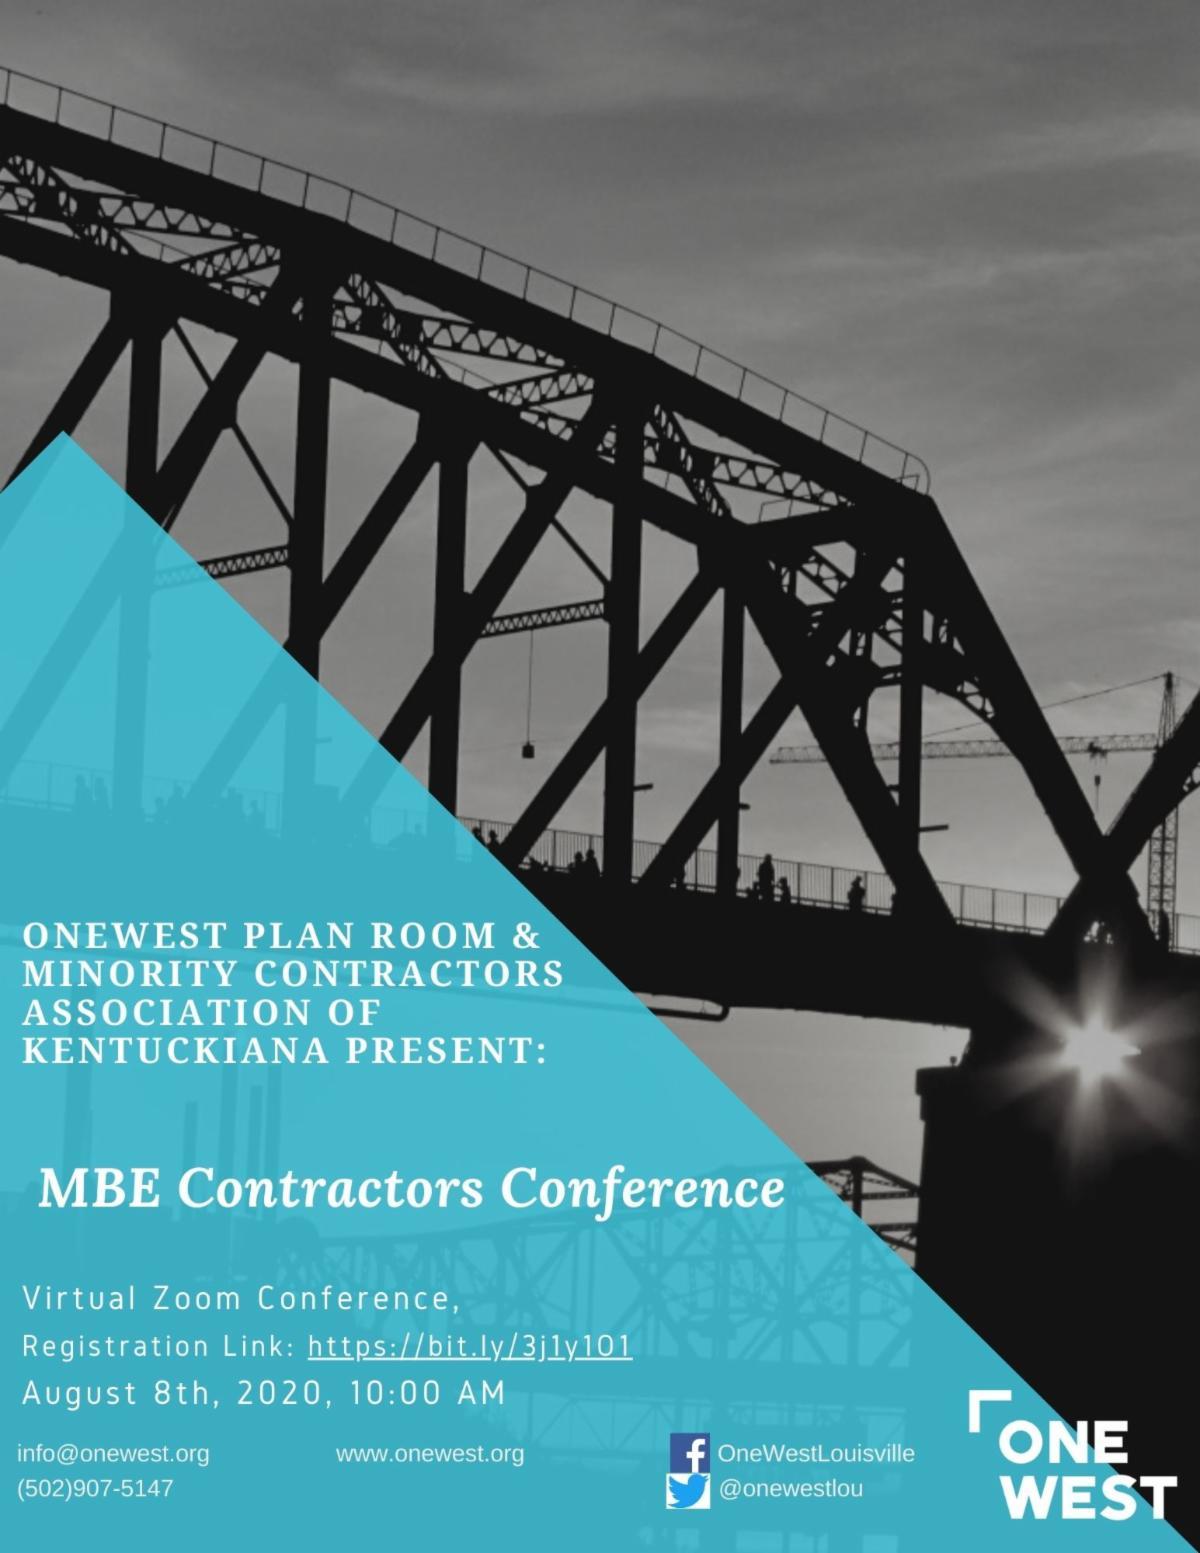 MBE Contractors Conference